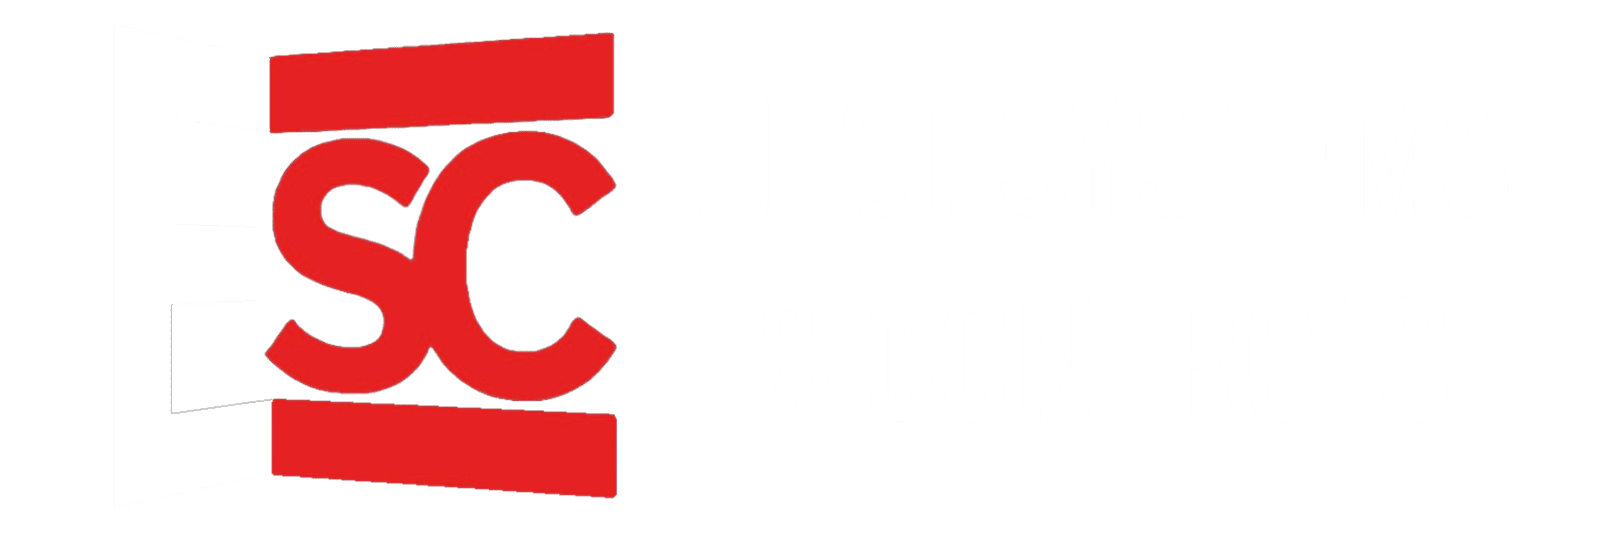 Ehst Systems and Controls